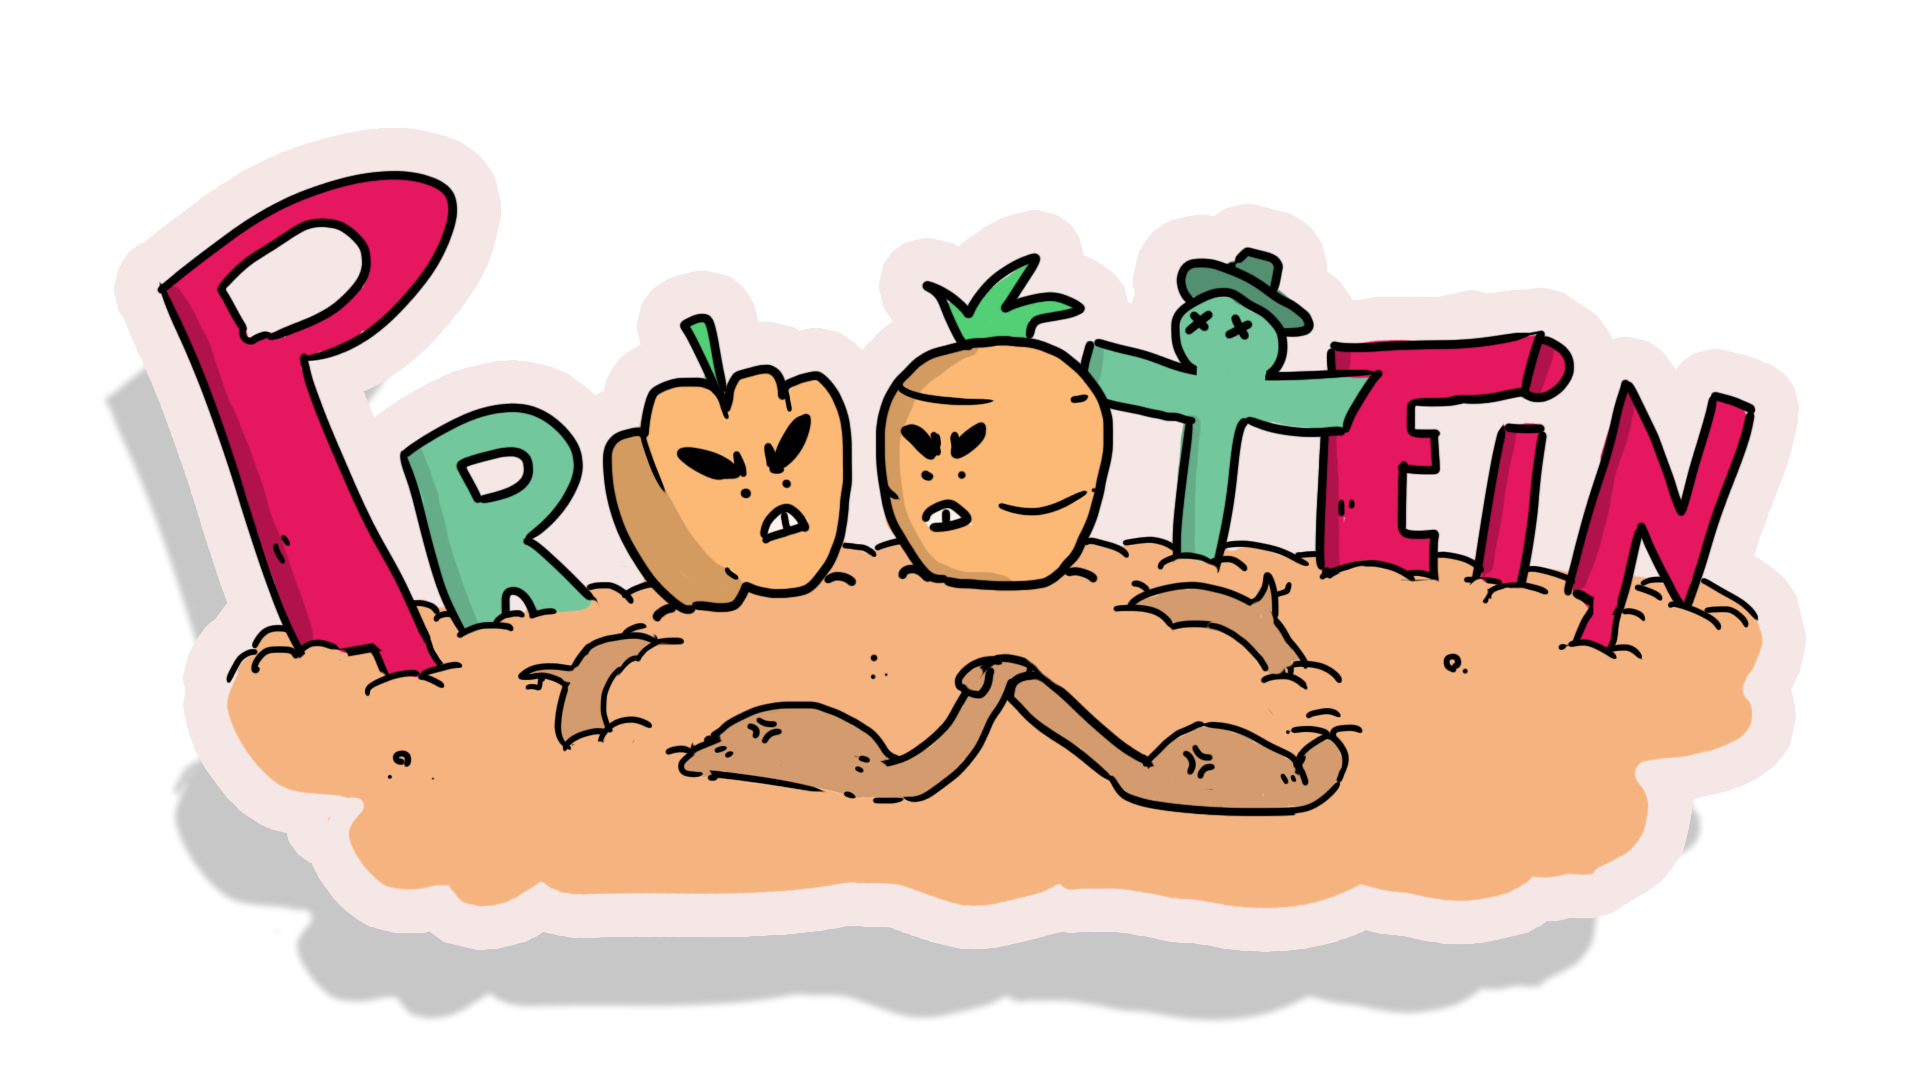 Prootein - A Root Wrestling Game